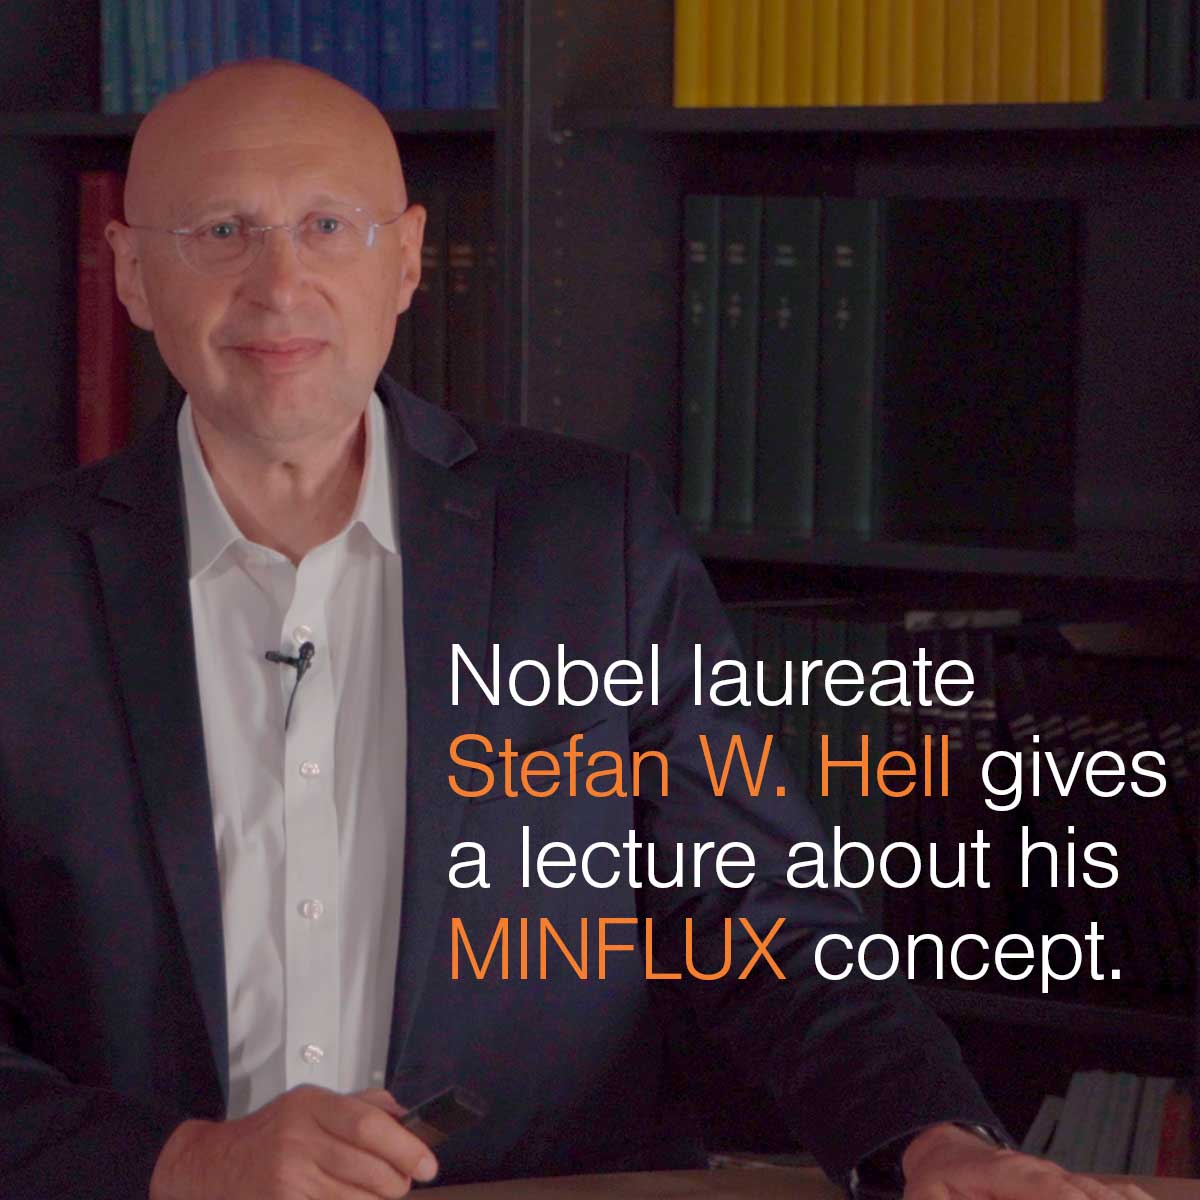 Nobel laureate Stefan W. Hell gives a lecture on his MINFLUX concept.